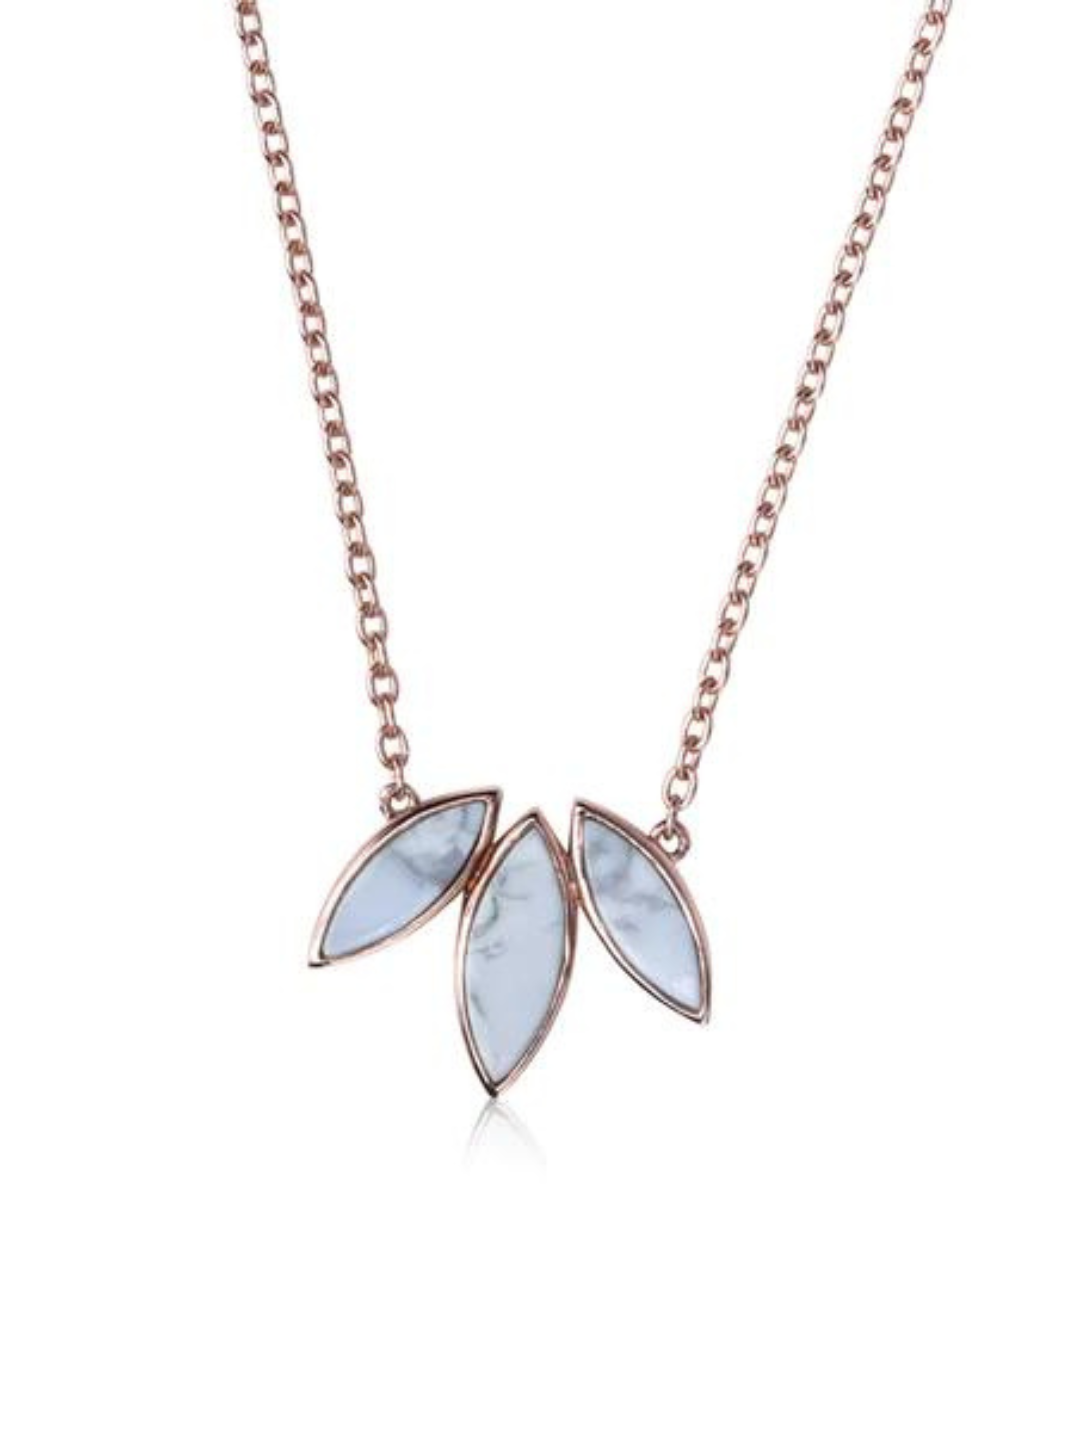 Made in Rose gold vermeil, our floral escape necklace is inlaid with hand cut magnesite. A unique & natural marbled gemstone that pops against the rose gold. At stunning piece inspired by nature and the inlaid floral stones found in Indian mosaics. You will love wearing this piece with many outfits for years to come.